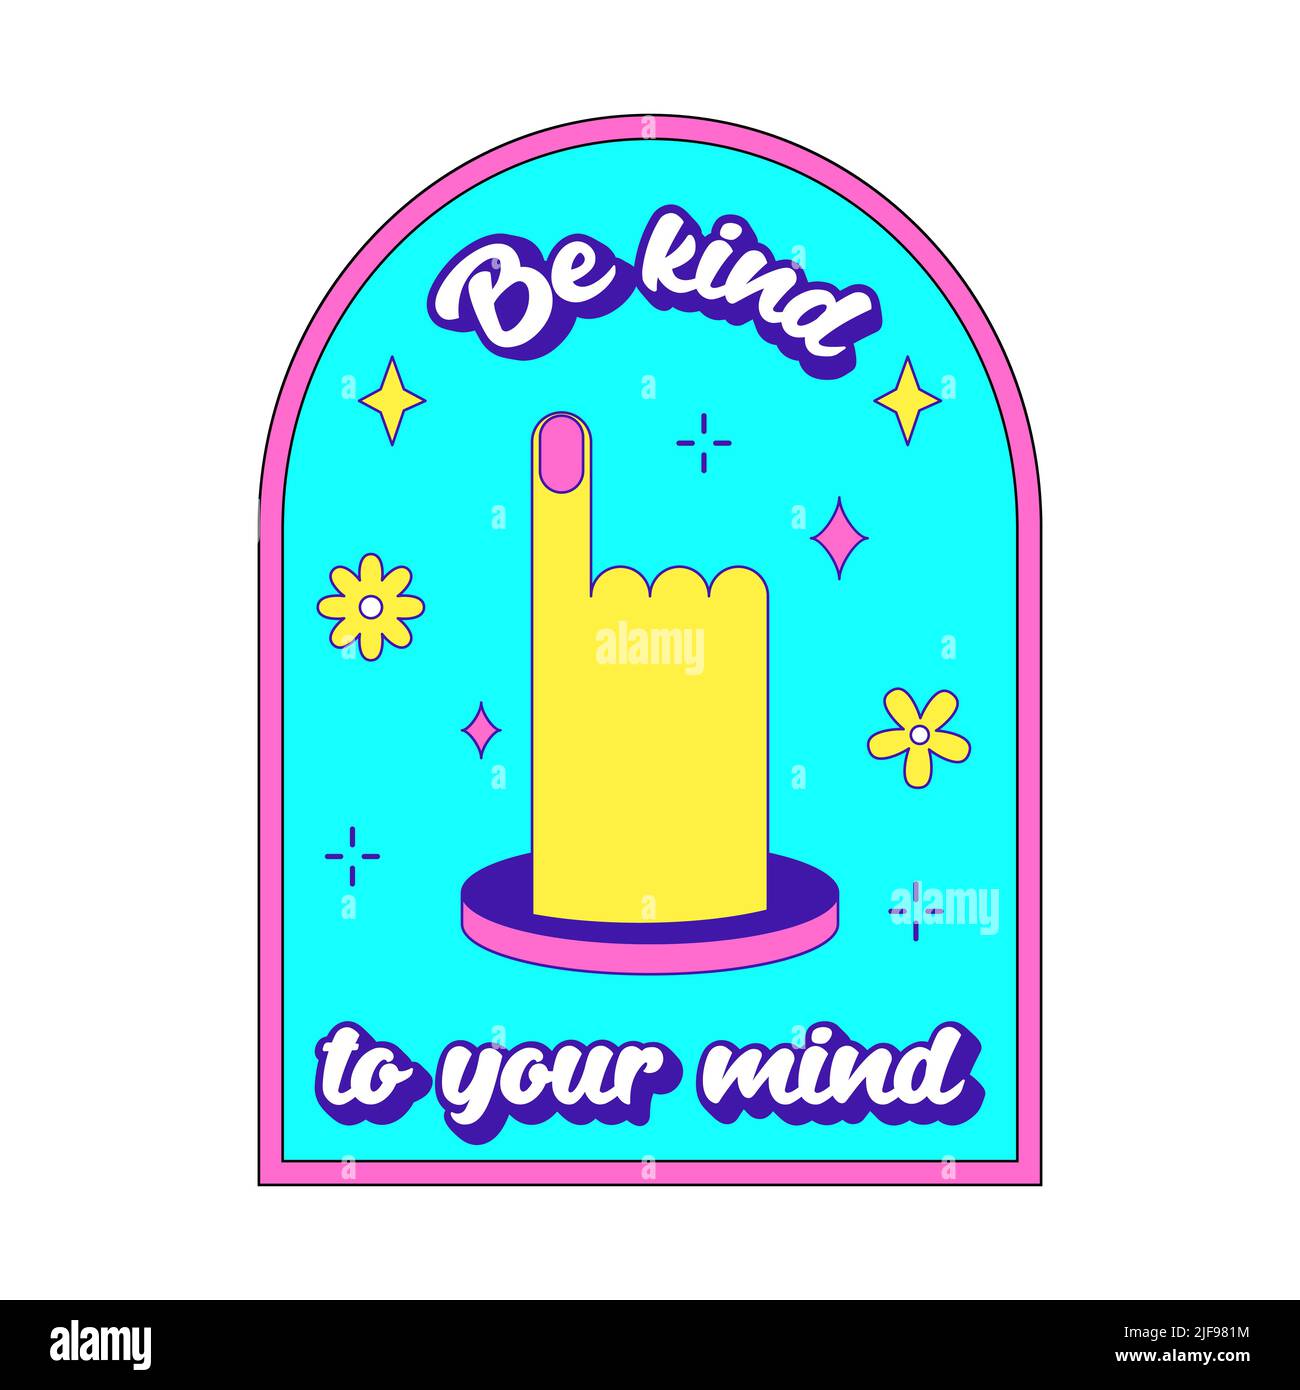 Y2k sticker in geometric shape. Index finger, flowers and bling elements and the words Be kind to your mind. Text graphic element in bright acid color Stock Vector